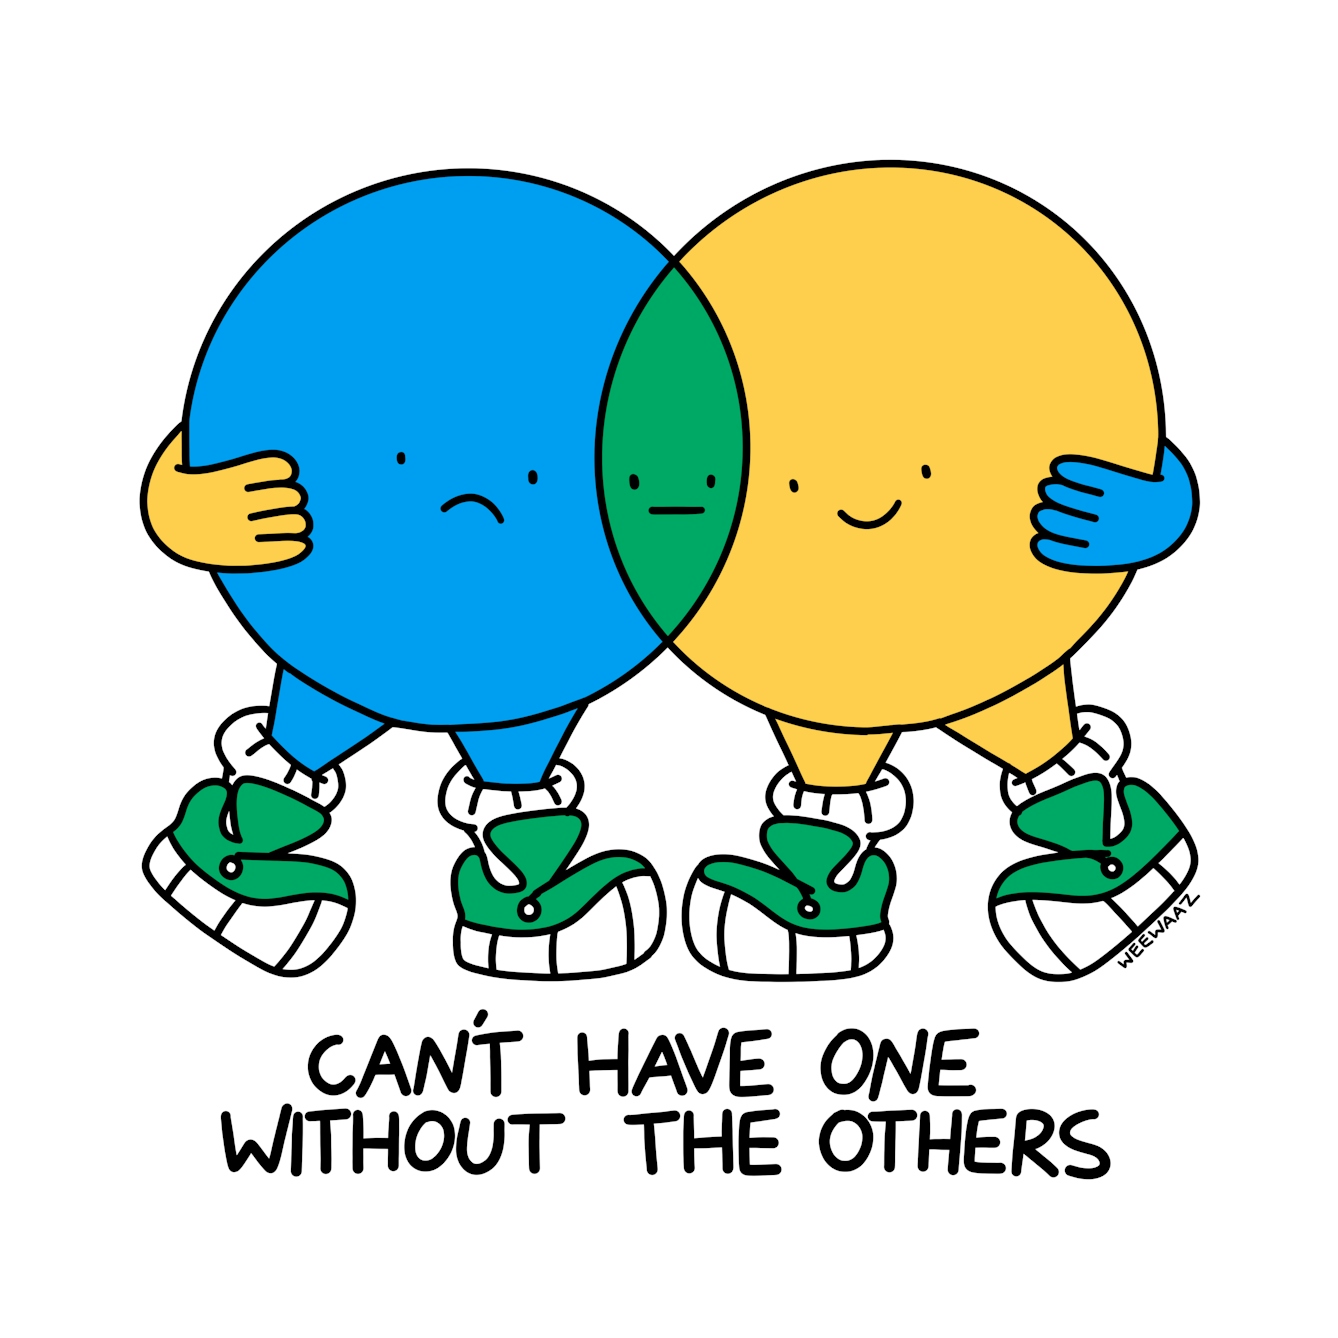 Two circular characters, the first happy the other sad, overlap each other creating a space and face in the middle that is in the middle of both emotions. They are surrounded by text that reads ‘Can’t have one without the others’.